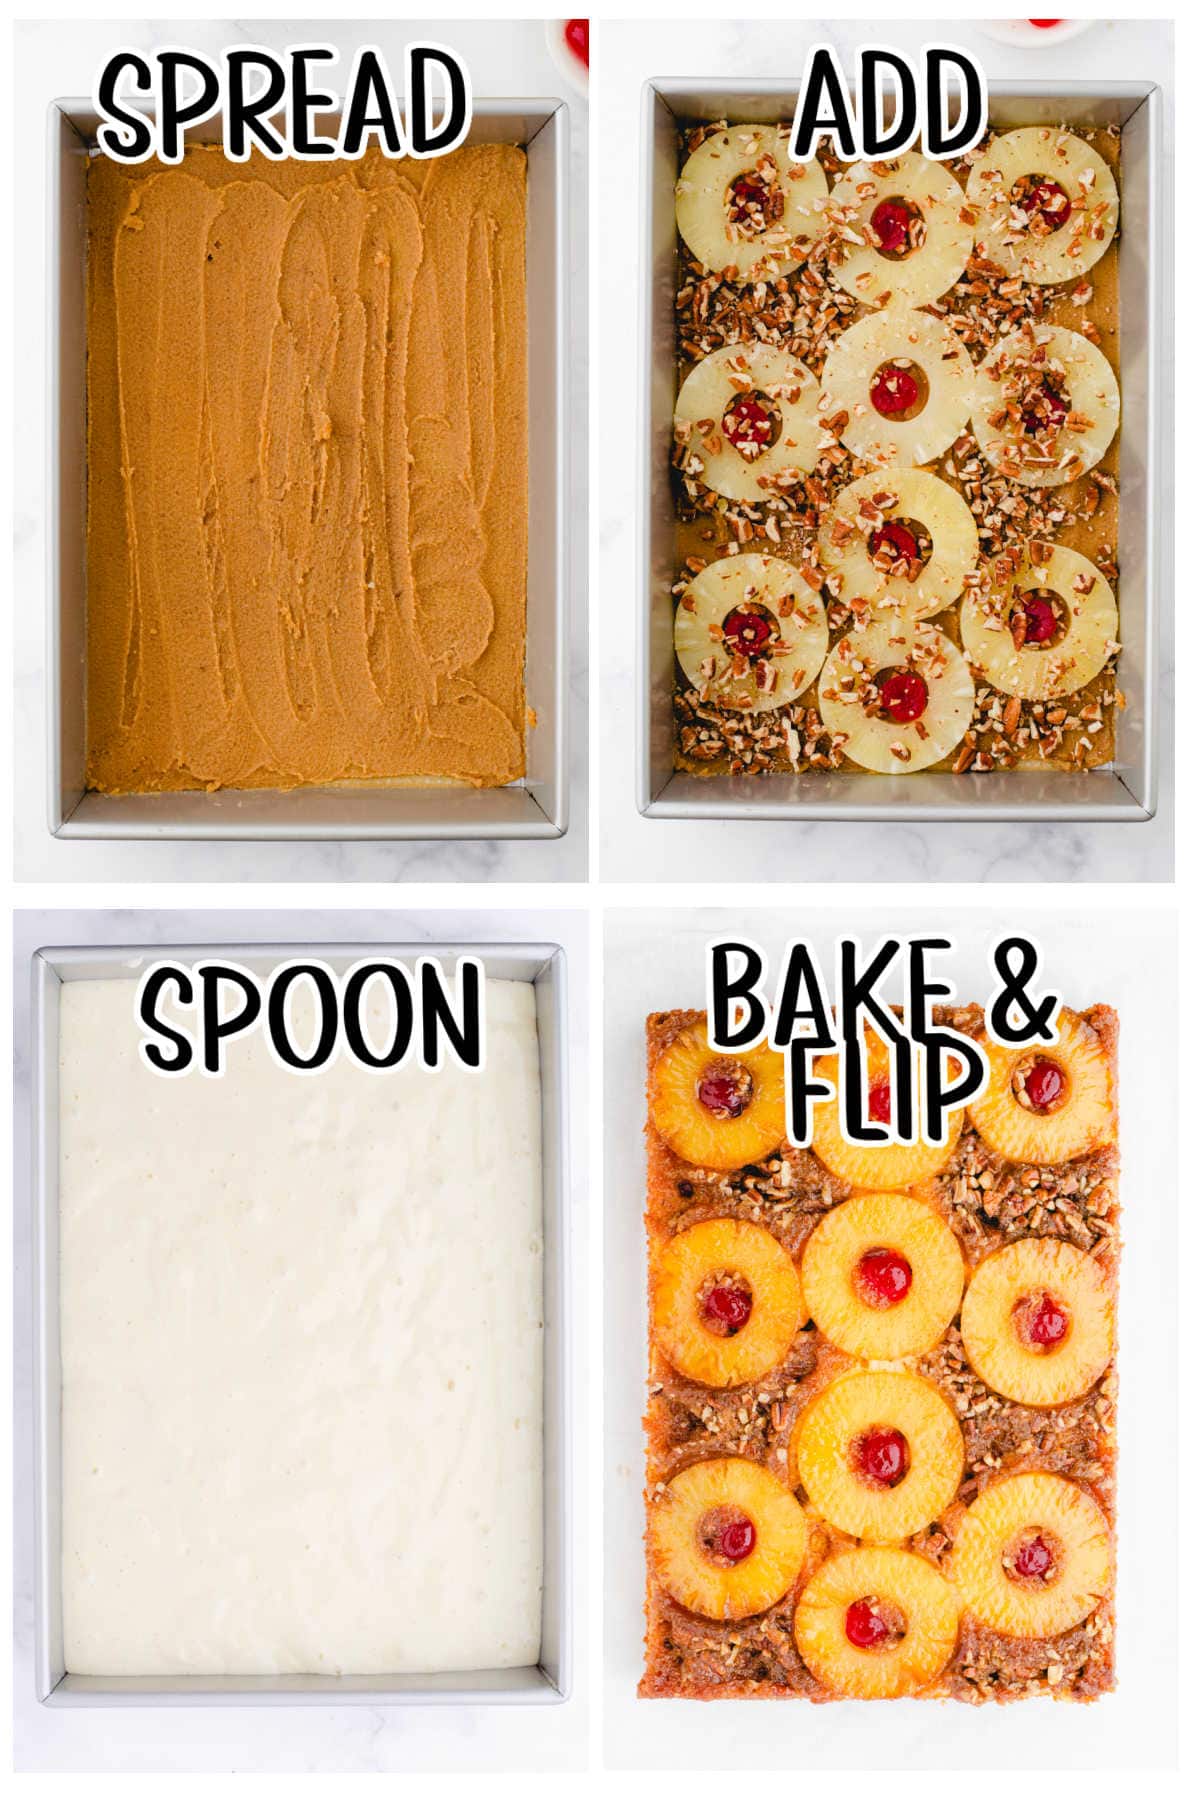 Step by step images showing how to make Peapple Upside Down Cake.